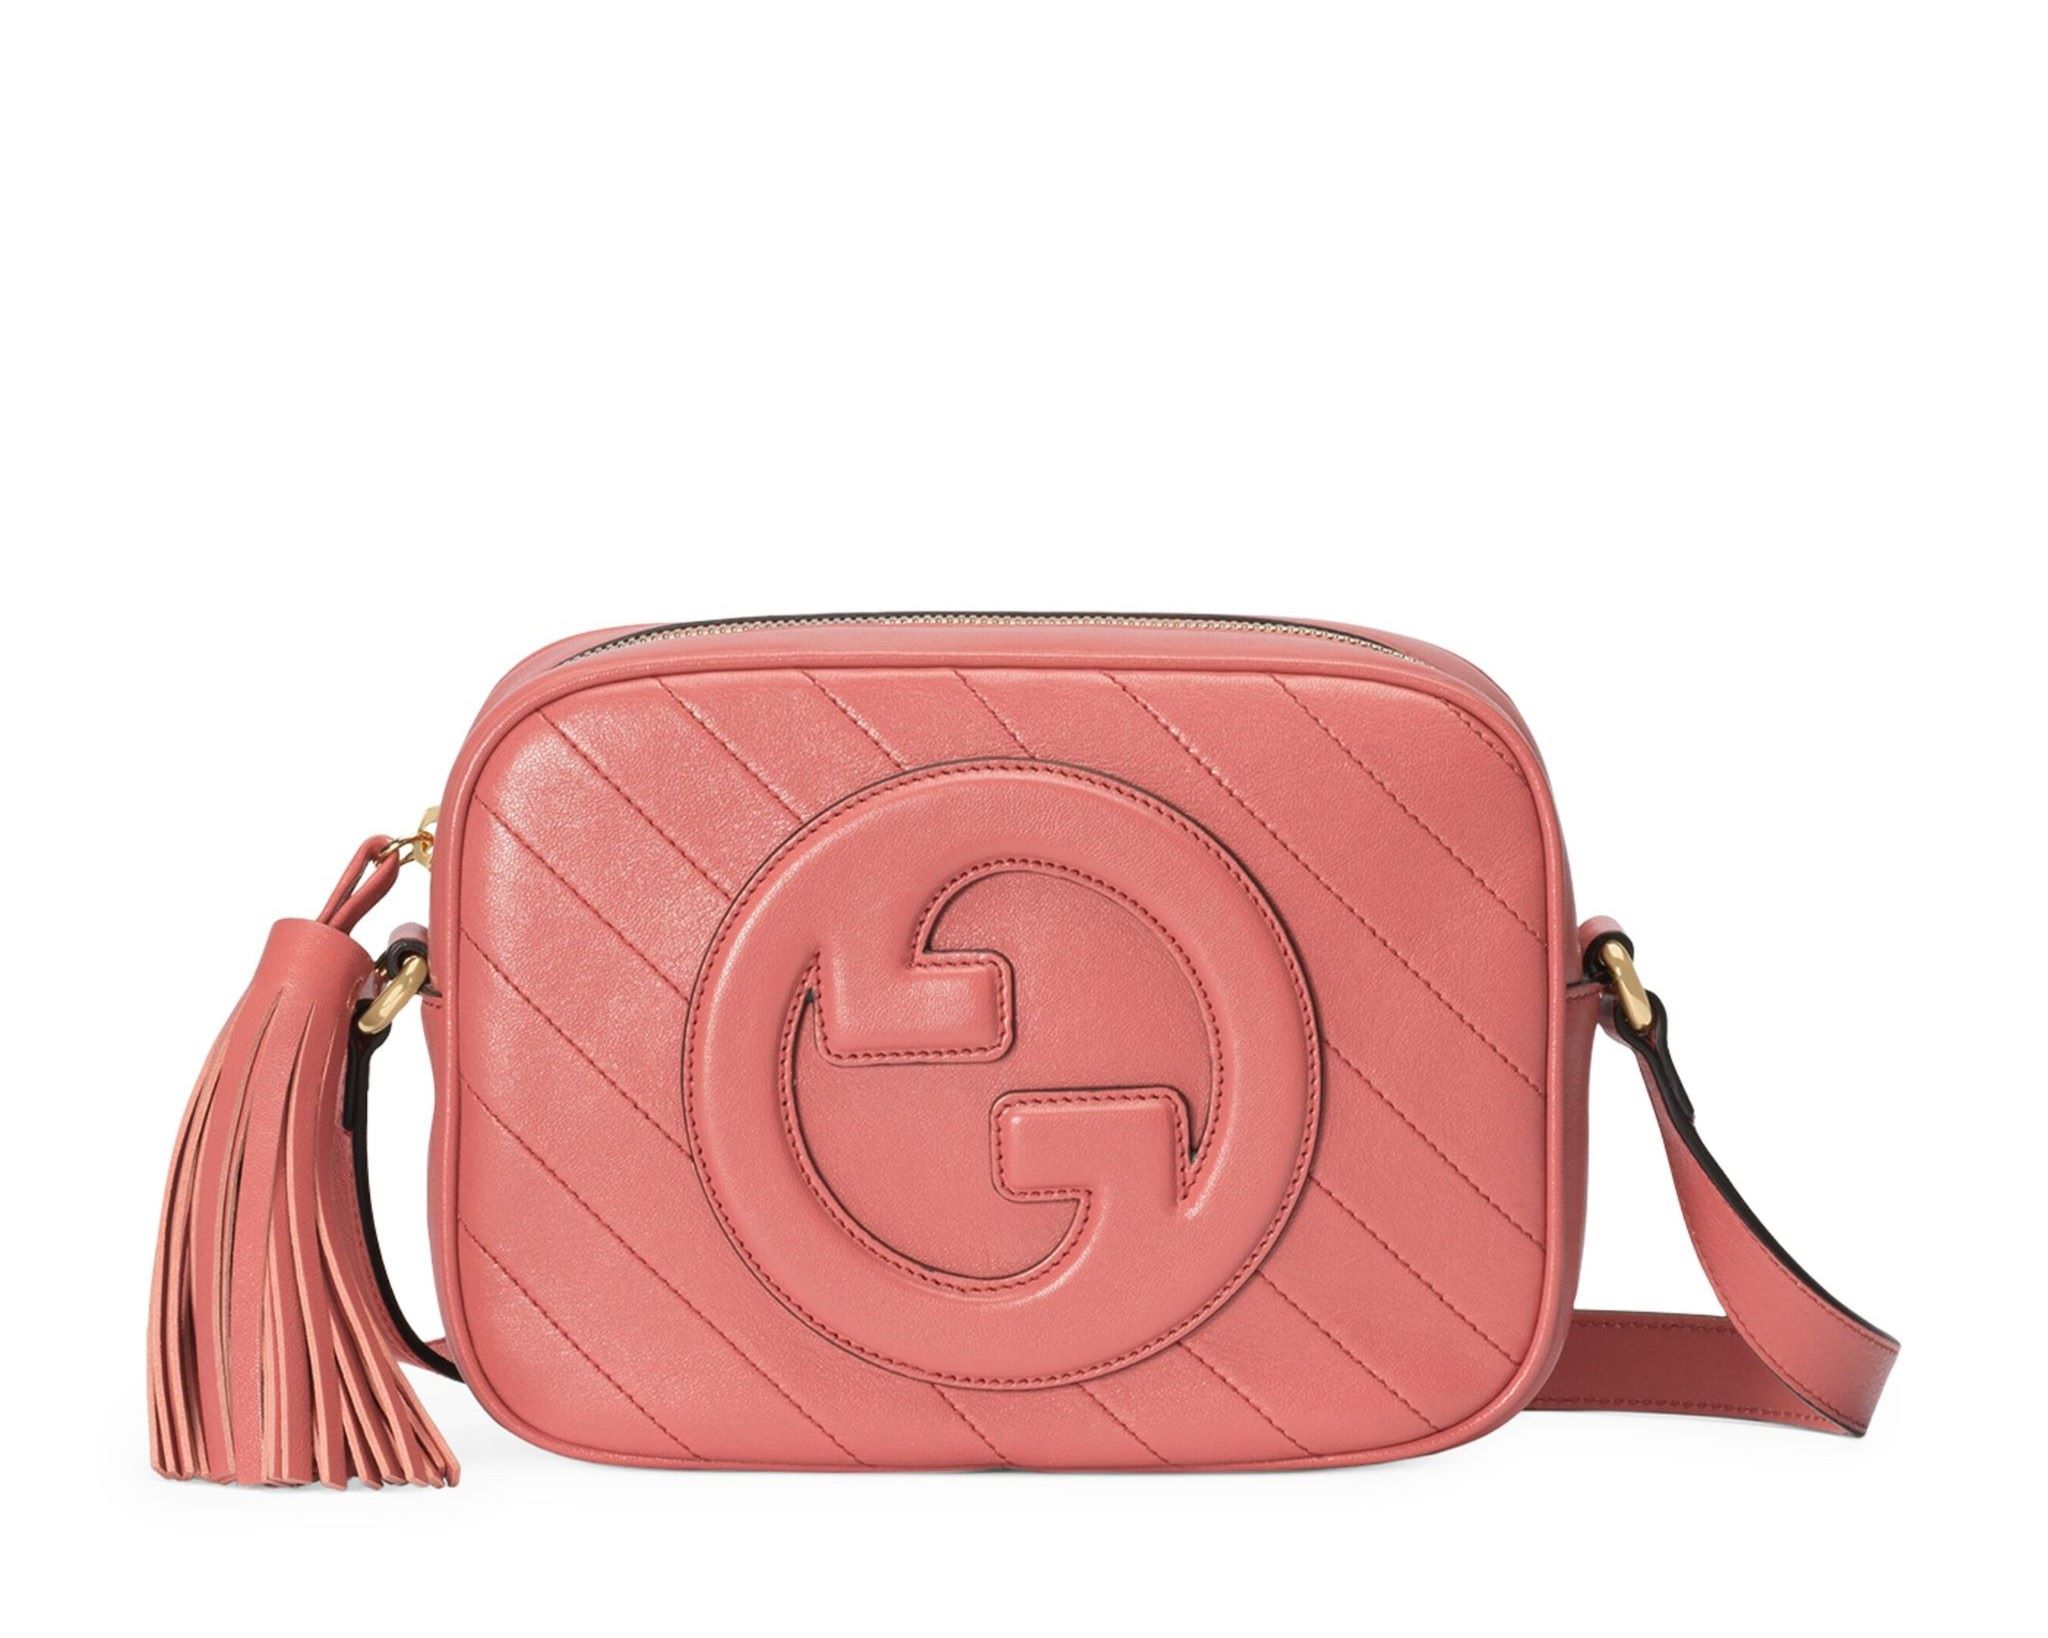 30 Juicy Facts About Gucci - The Fact Shop